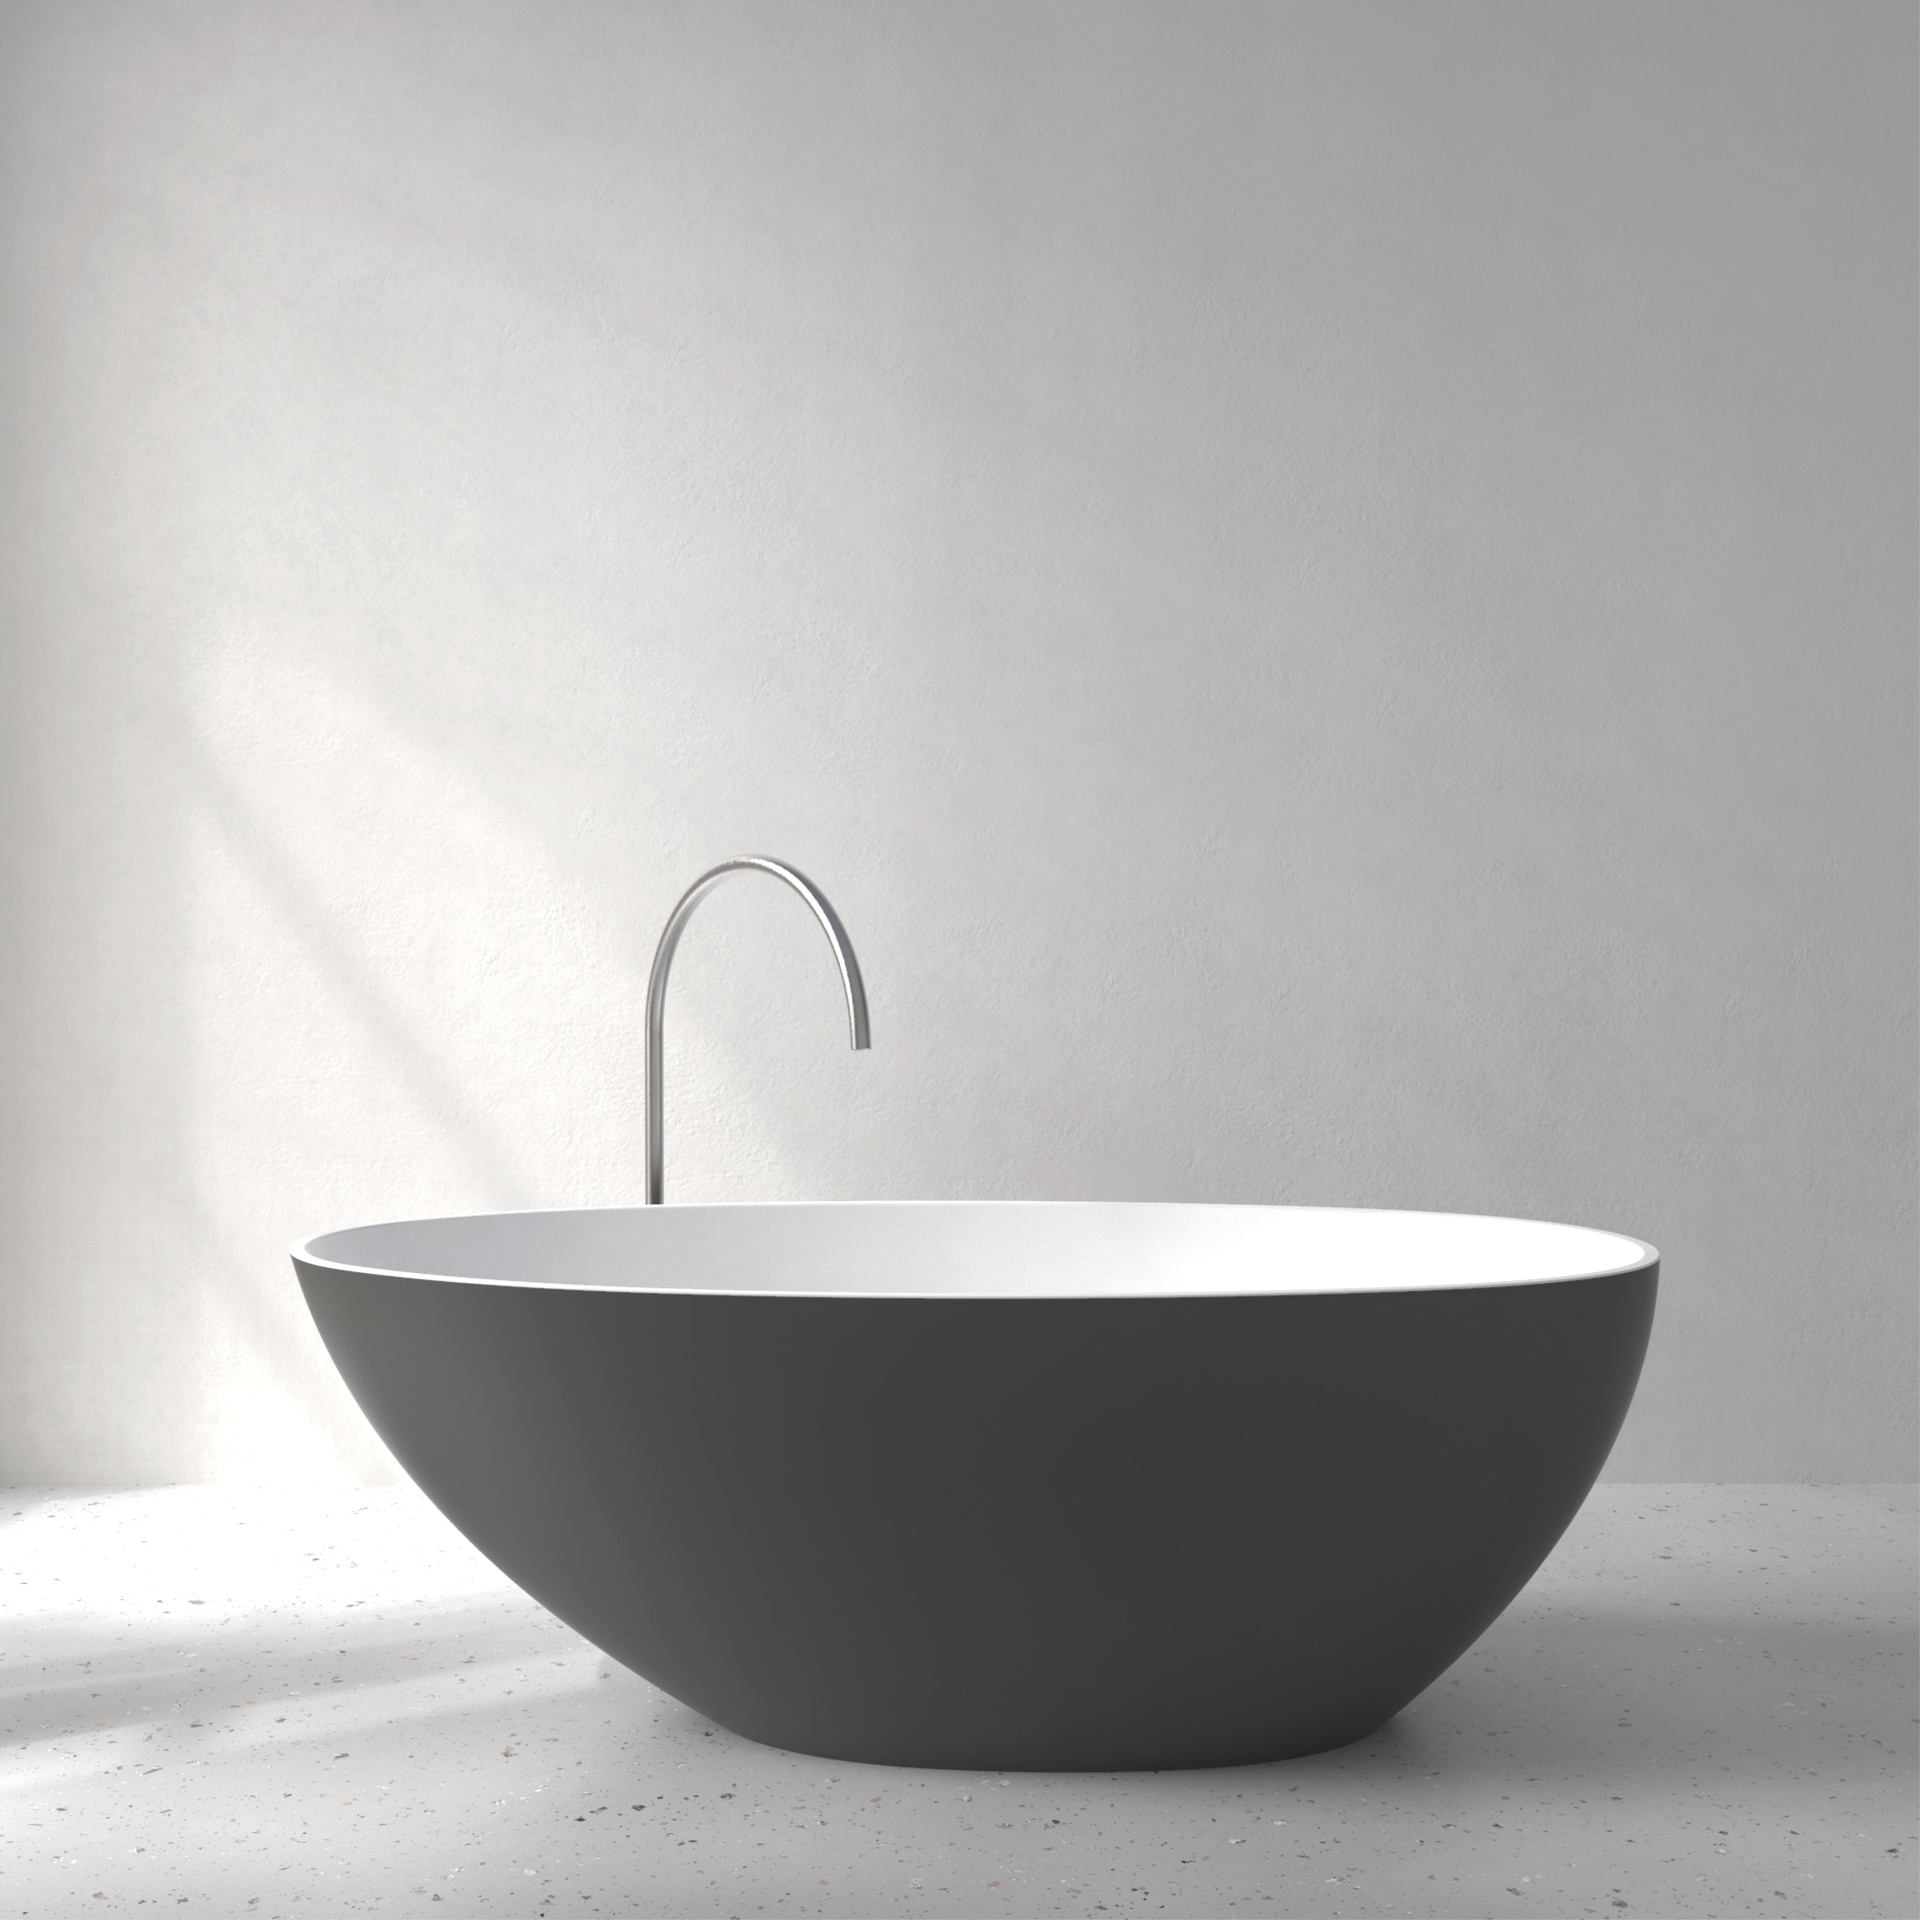 [FEA02-SAGREY] Ease ligbad met Soft Touch (Anthracite Grey)